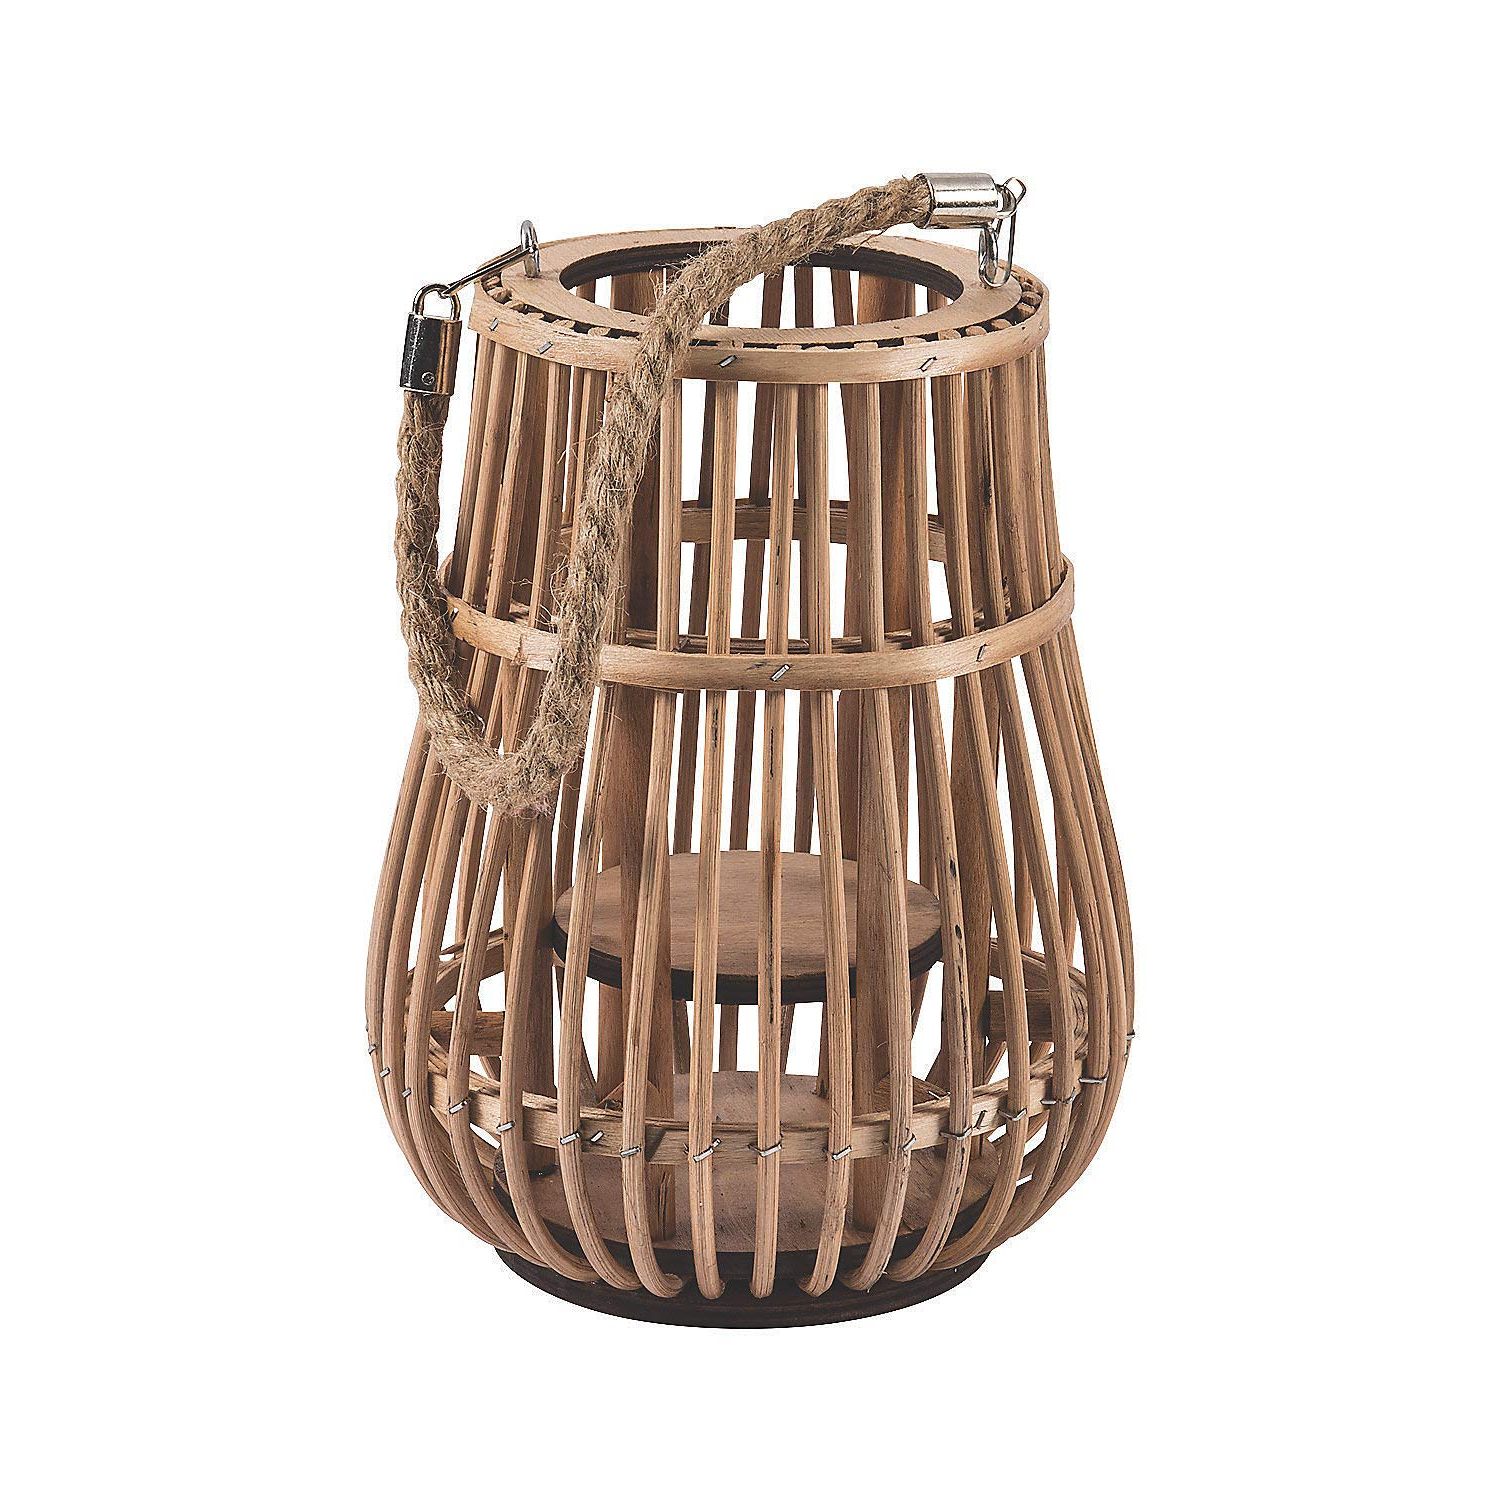 Amazon: Rattan Natural Lantern With Handle – Great For Wedding And Home  Decorations : Home & Kitchen Regarding Famous Natural Rattan Lantern (View 4 of 10)